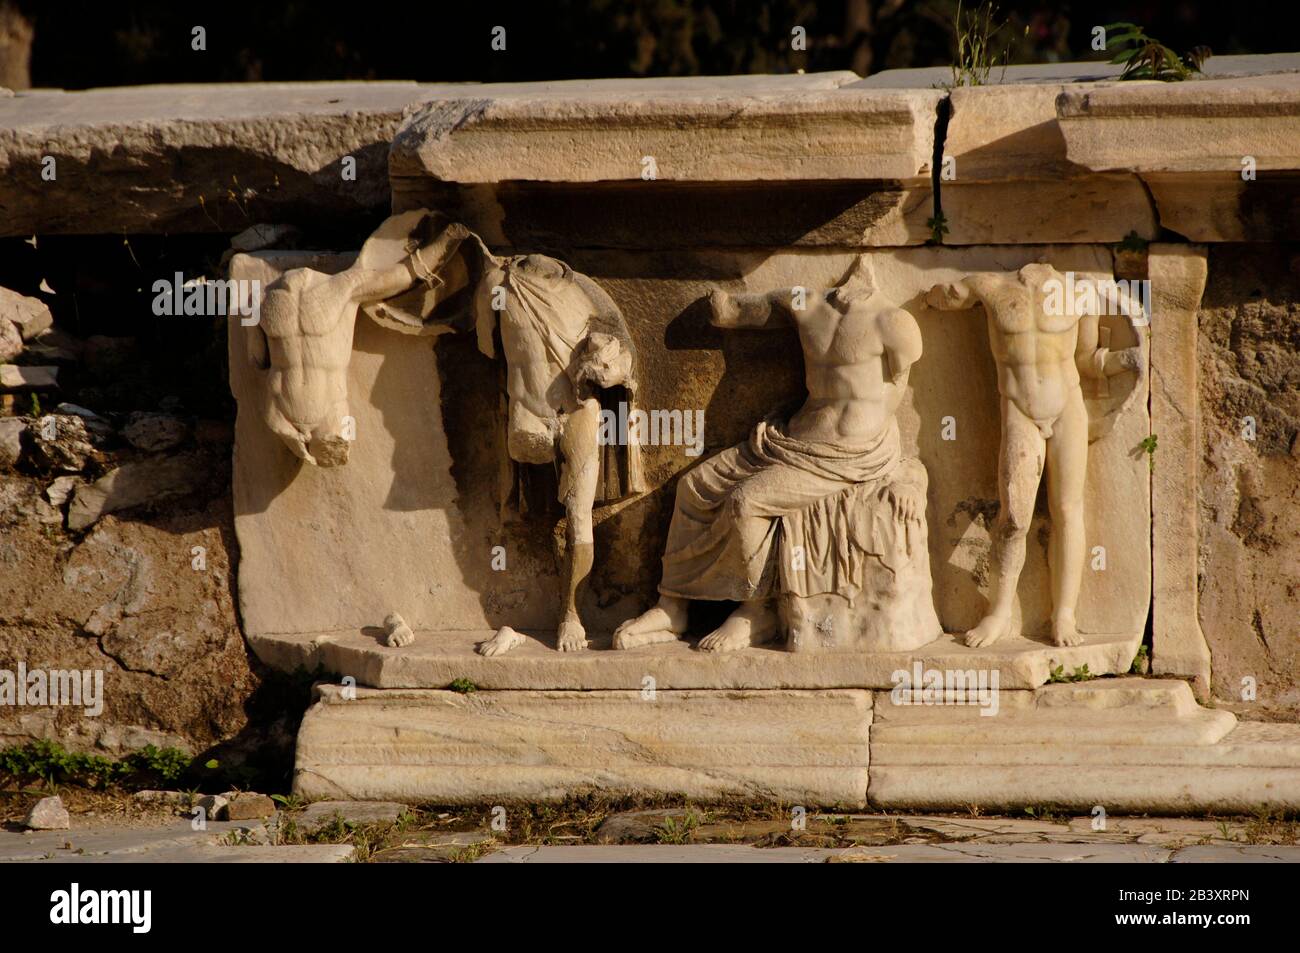 Greece, Athens. Stage relief from the Theatre of Dionysus. Roman Age. 2nd century BC. Back of the stage. Relief depicting a scene from the myth of Dionysus. Stock Photo